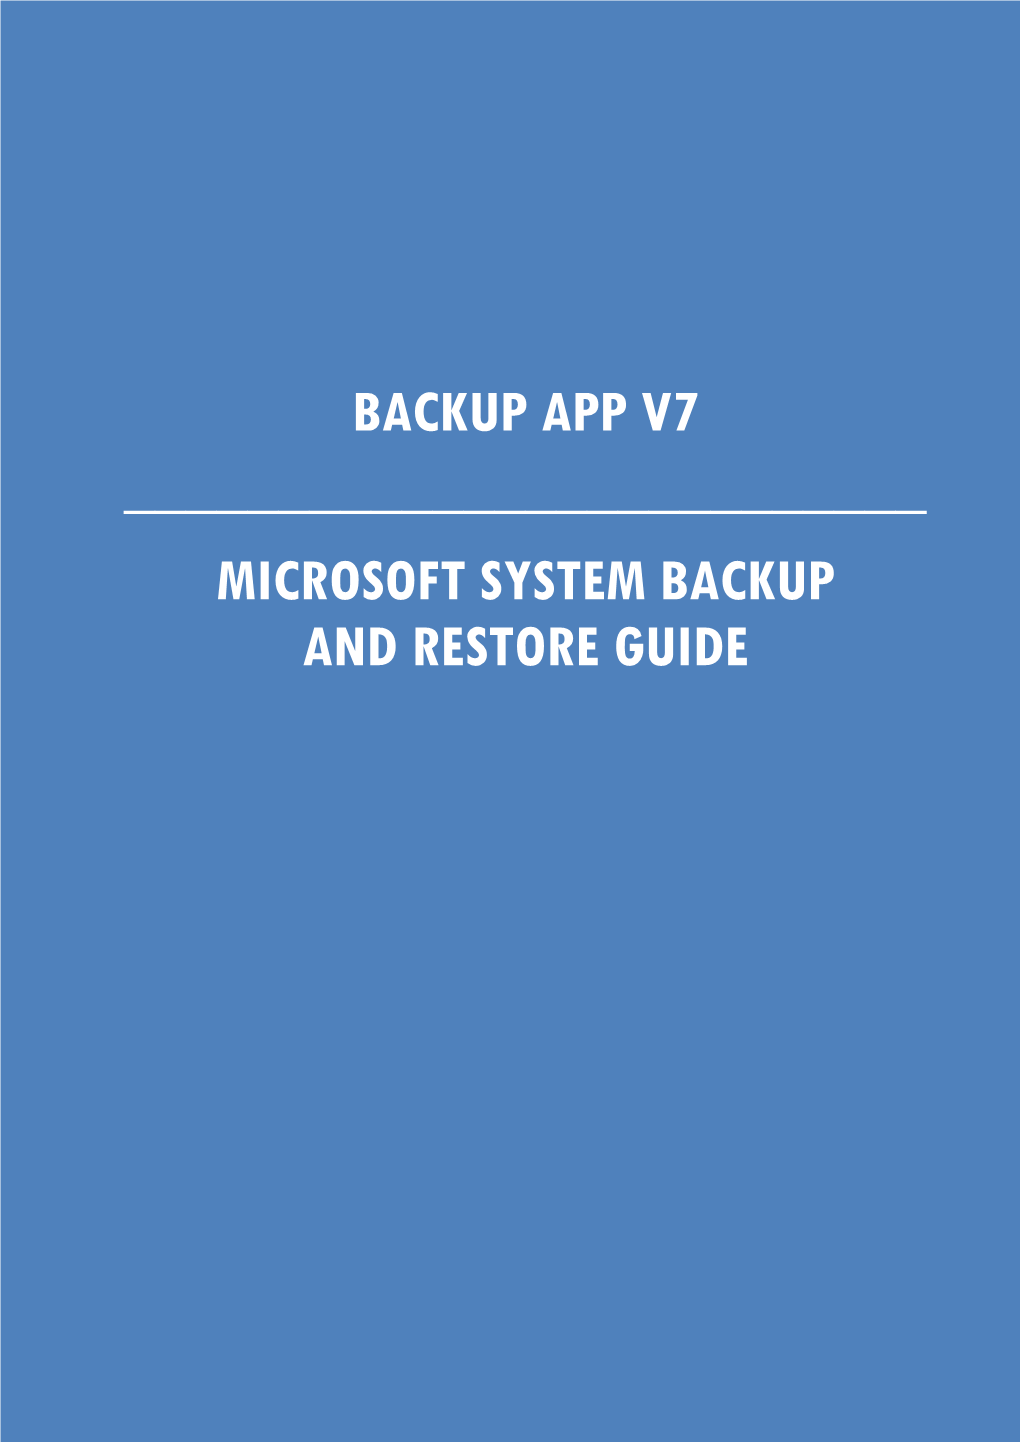 Microsoft System Backup and Restore Guide